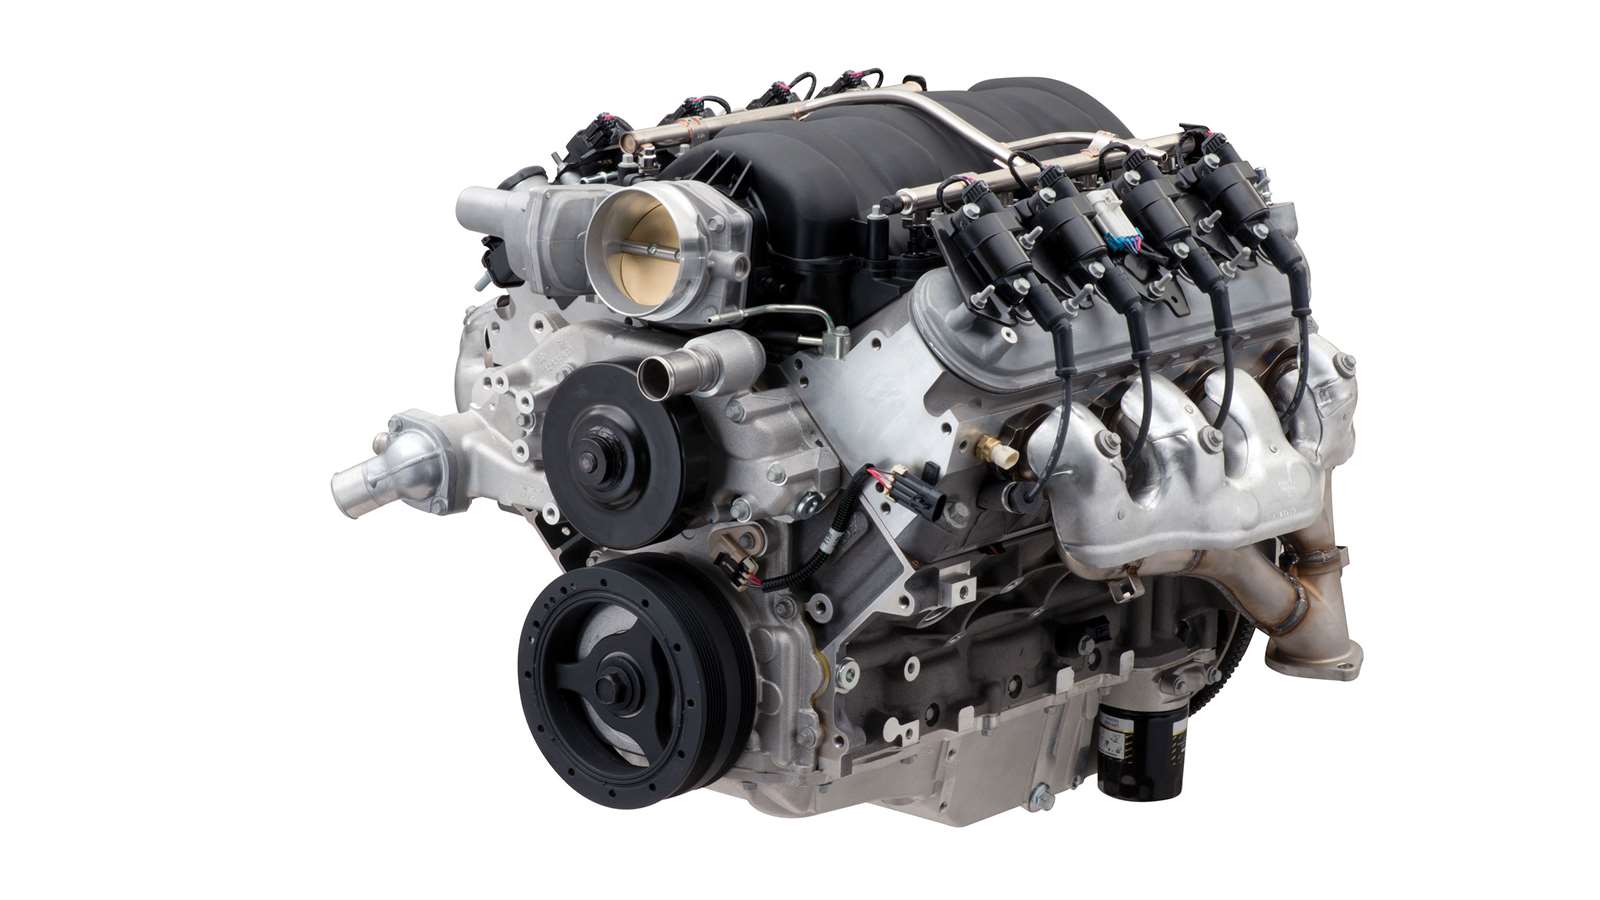 There's a new ready-to-run Chevrolet V8 crate engine with 570PS | GRR